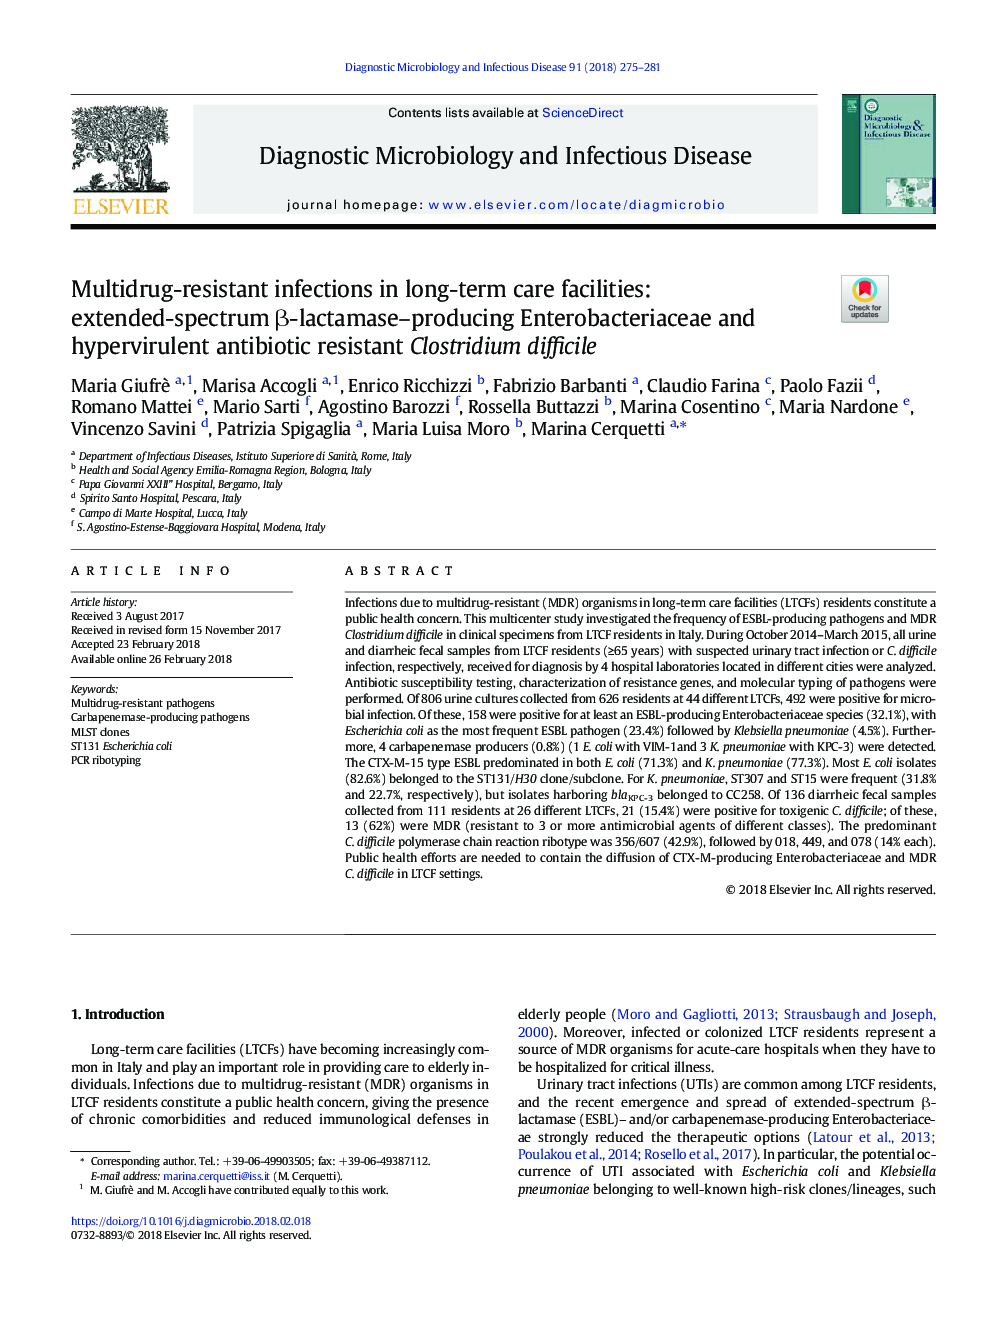 Multidrug-resistant infections in long-term care facilities: extended-spectrum Î²-lactamase-producing Enterobacteriaceae and hypervirulent antibiotic resistant Clostridium difficile